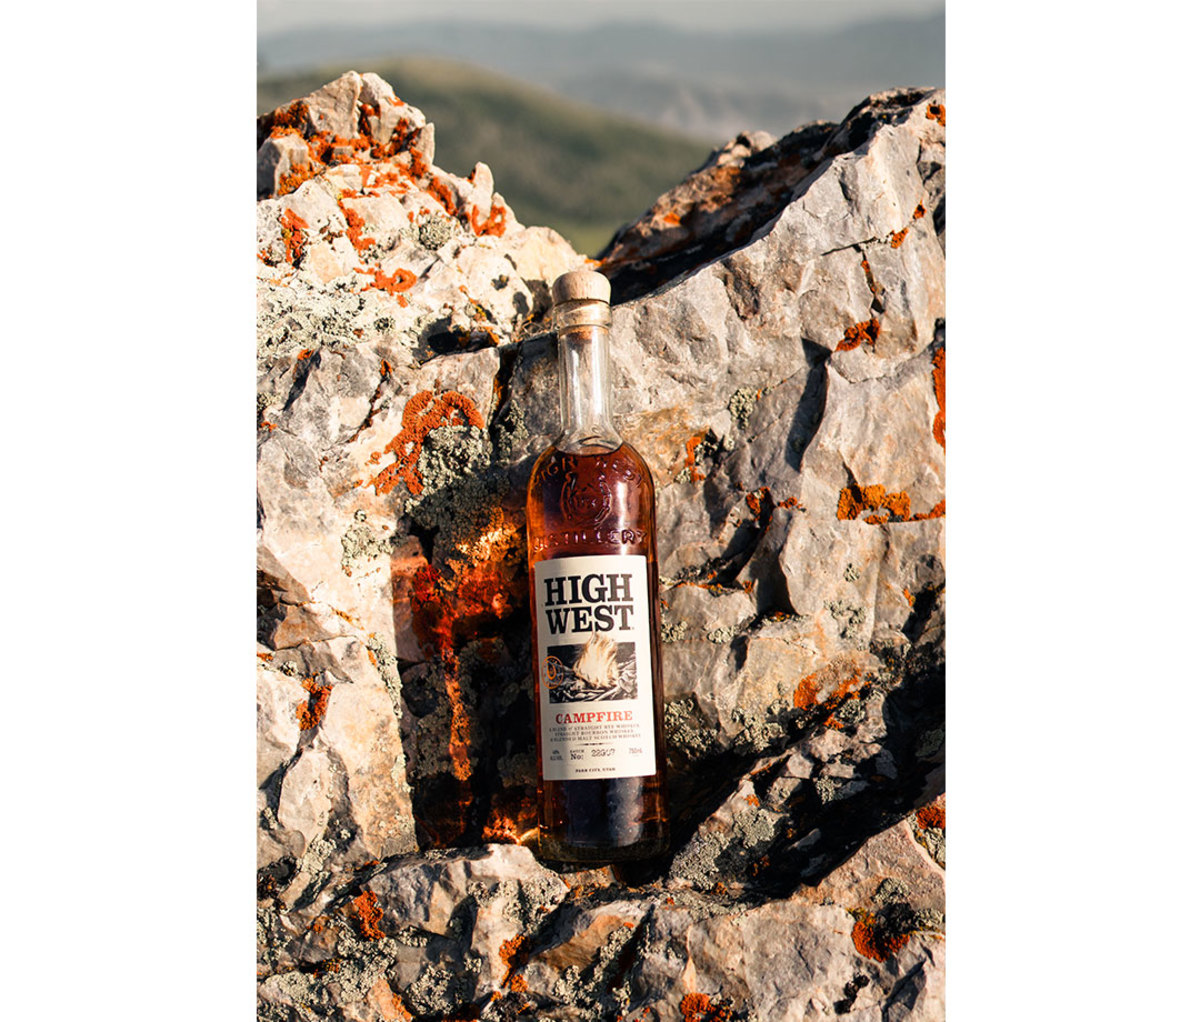 Bottle of High West Campfire whiskey sitting against rocks